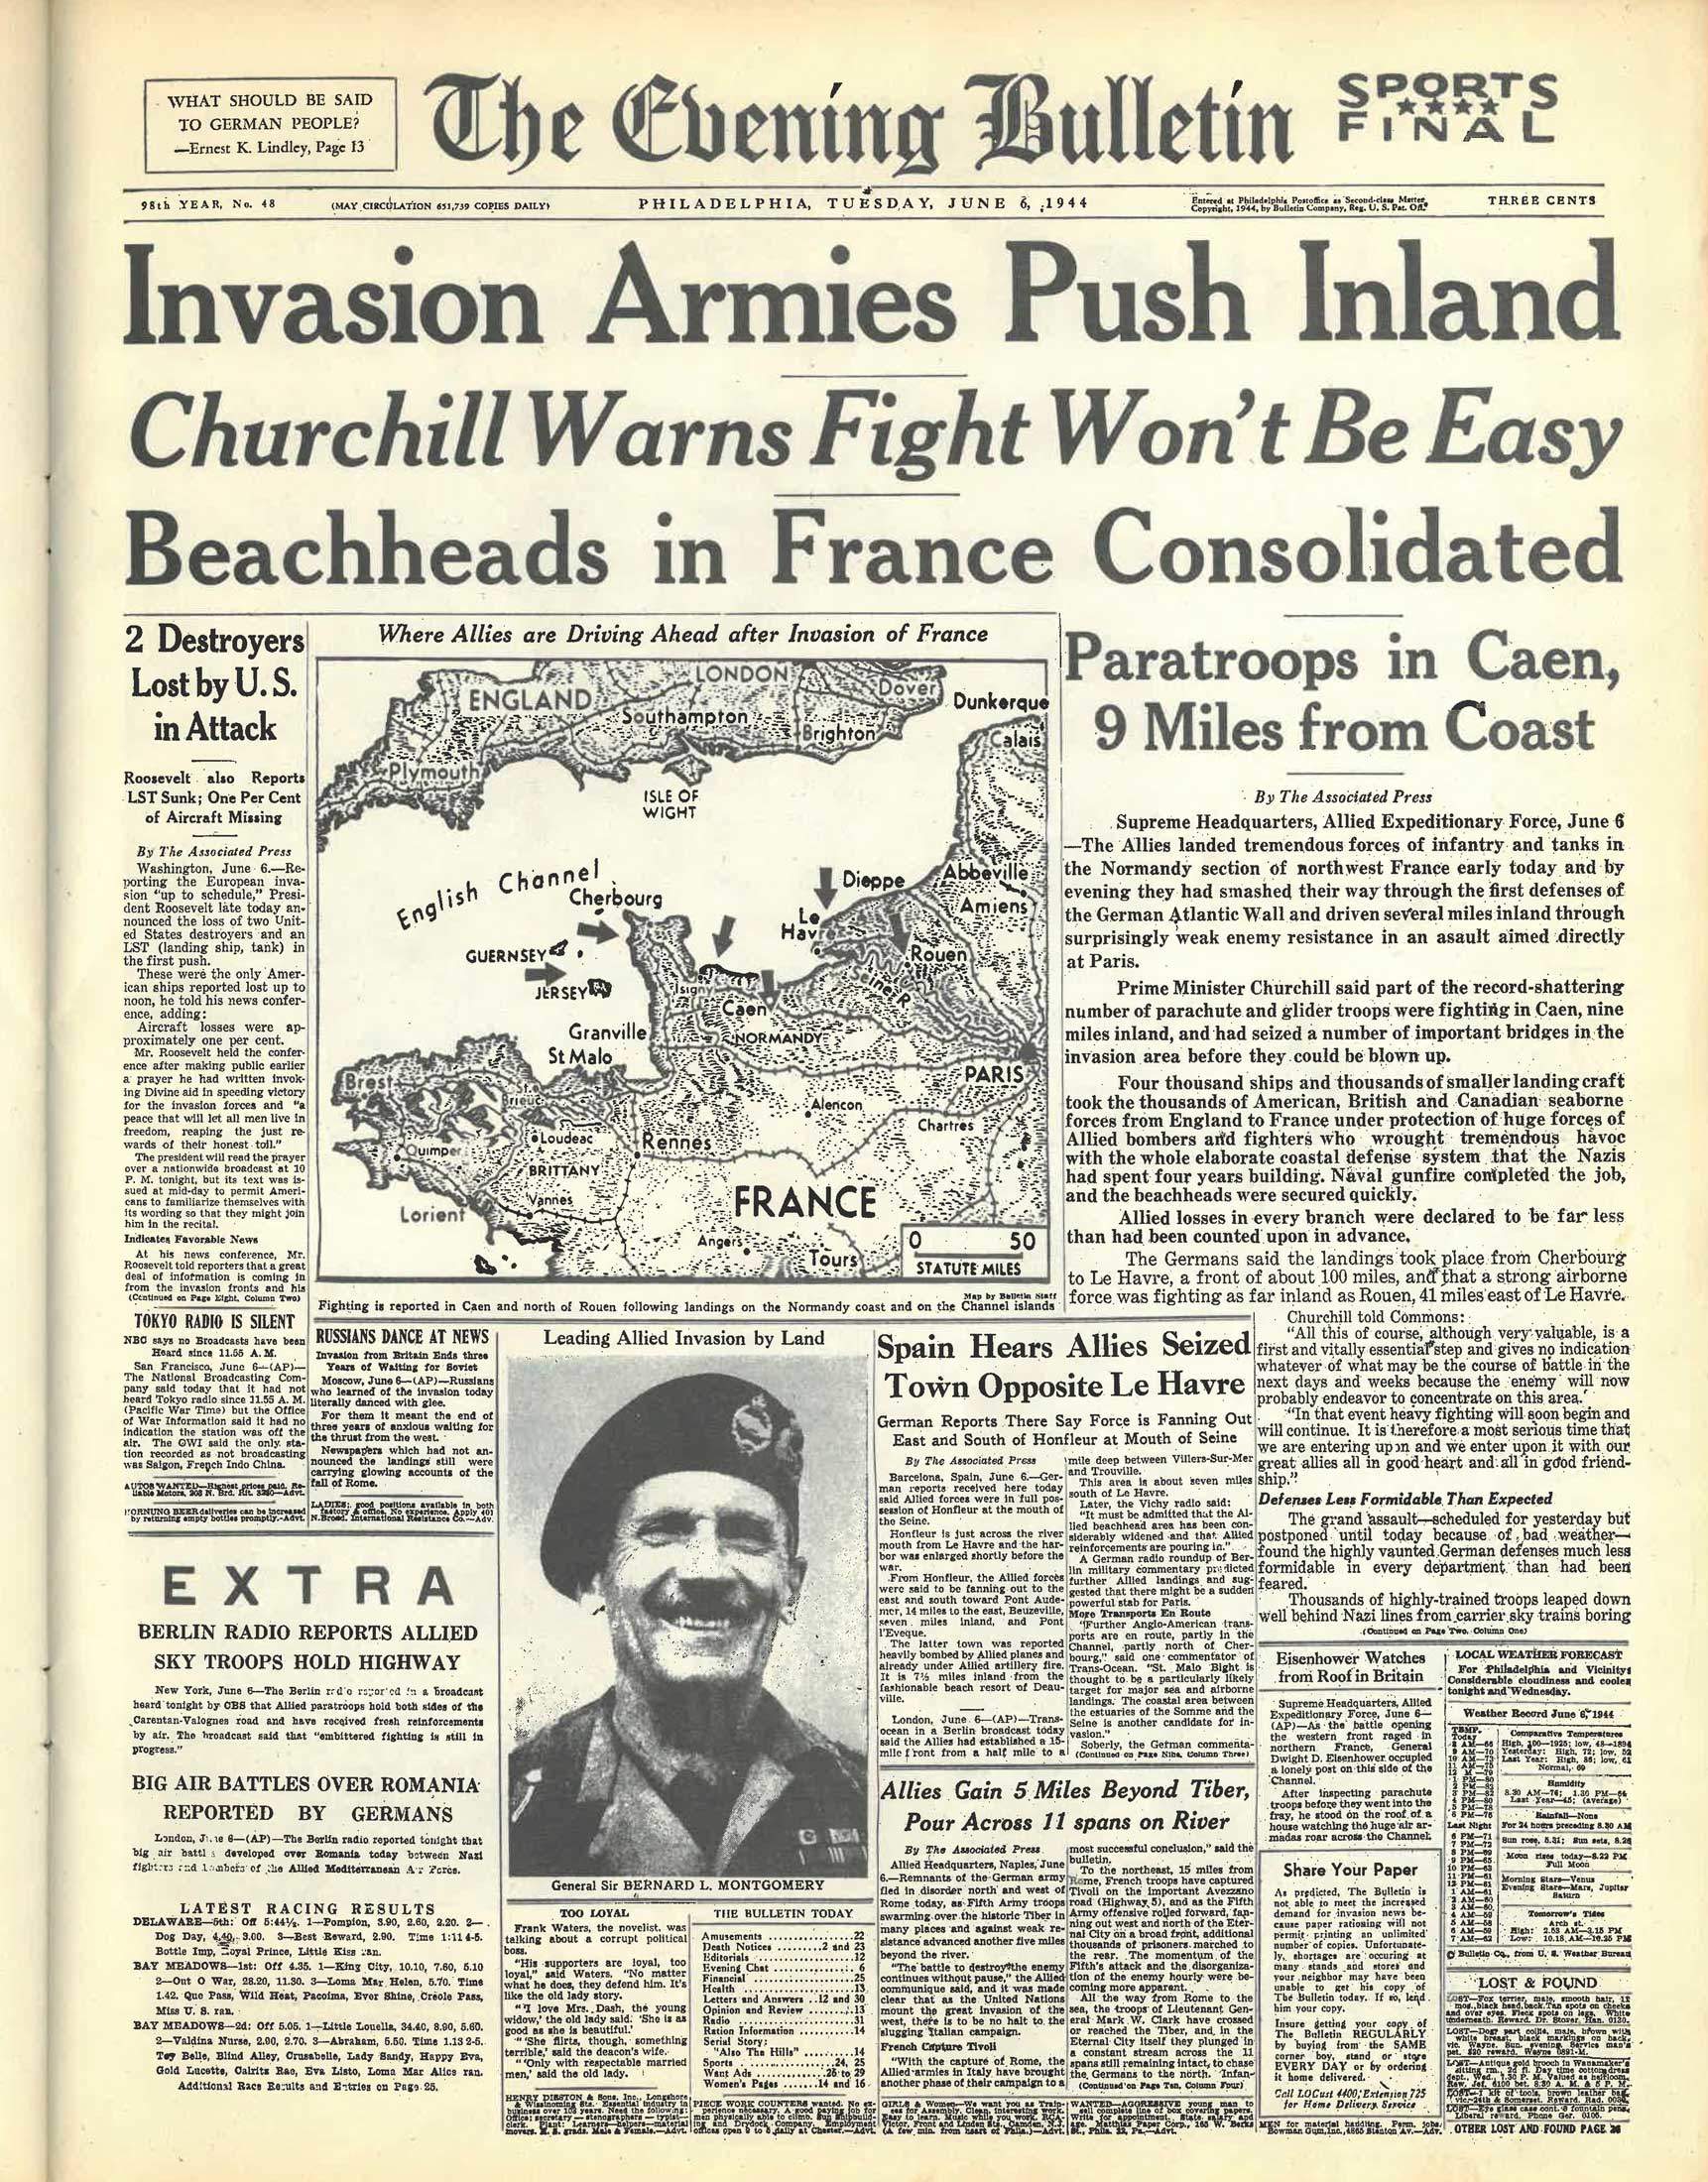 Image of The Evening Bulletin Newspaper Covering D-Day "Invasion Armies Push Inland"